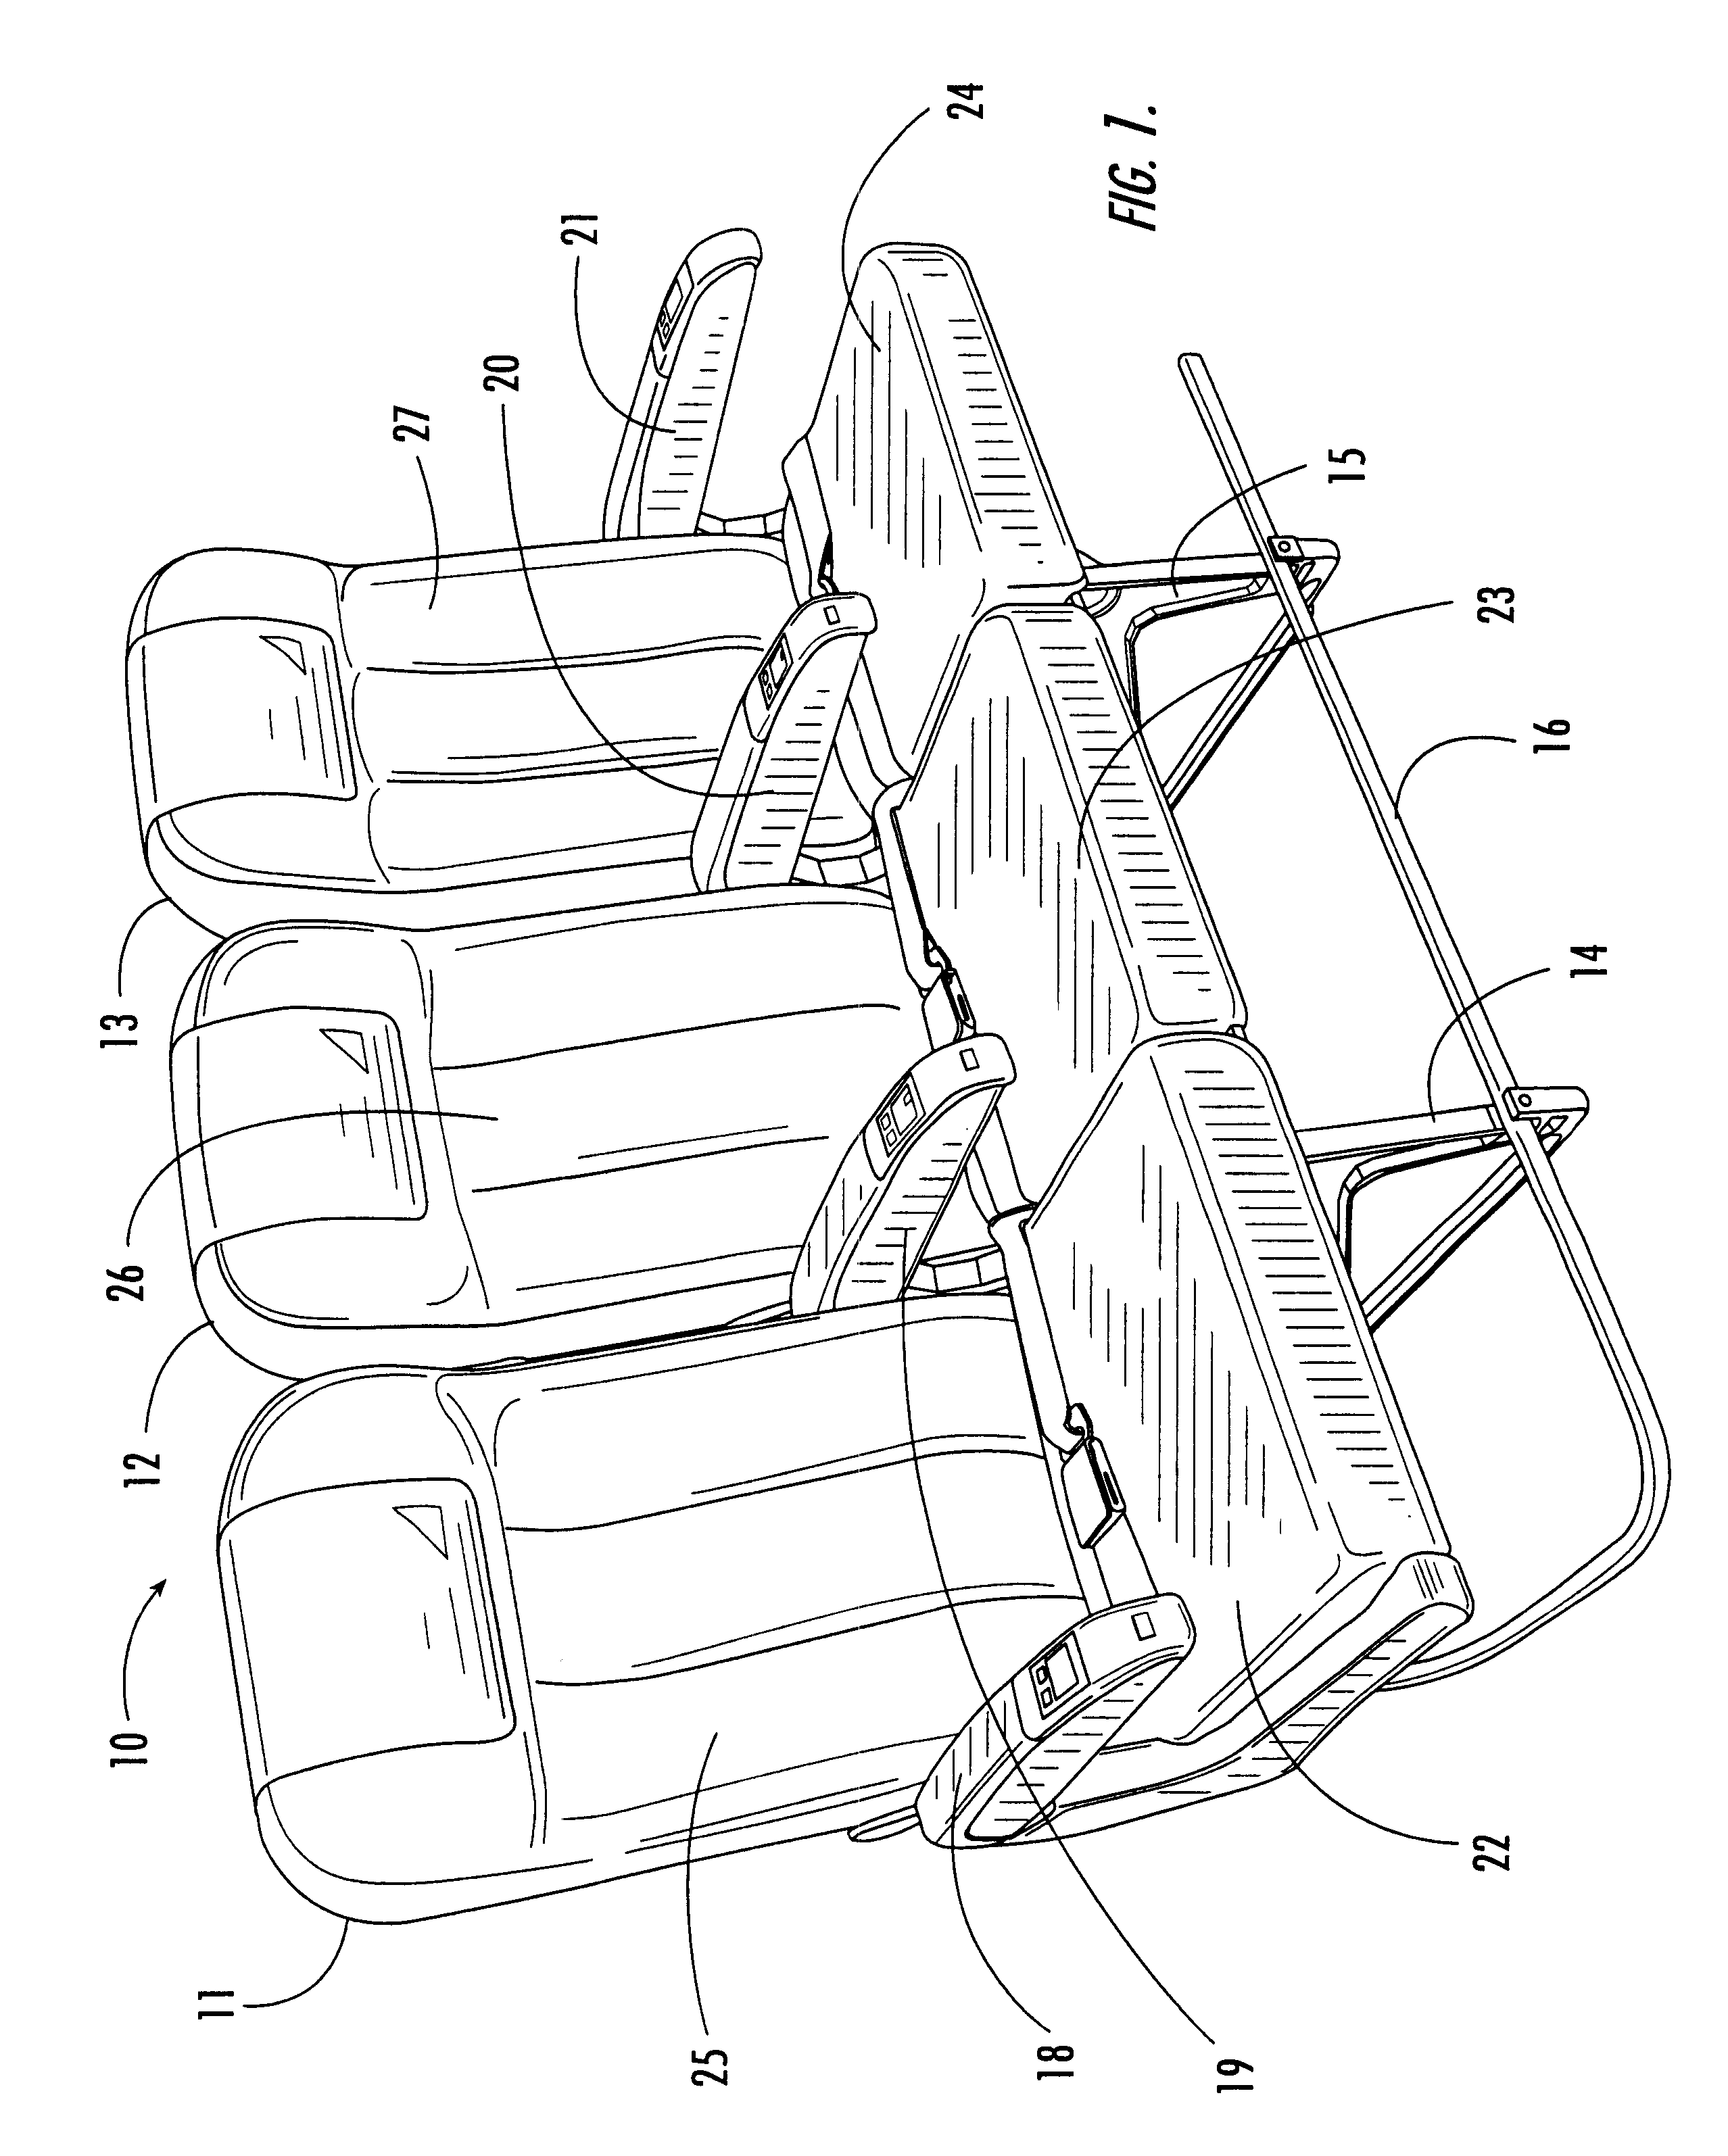 Passenger seat with seat back breakover assembly and method